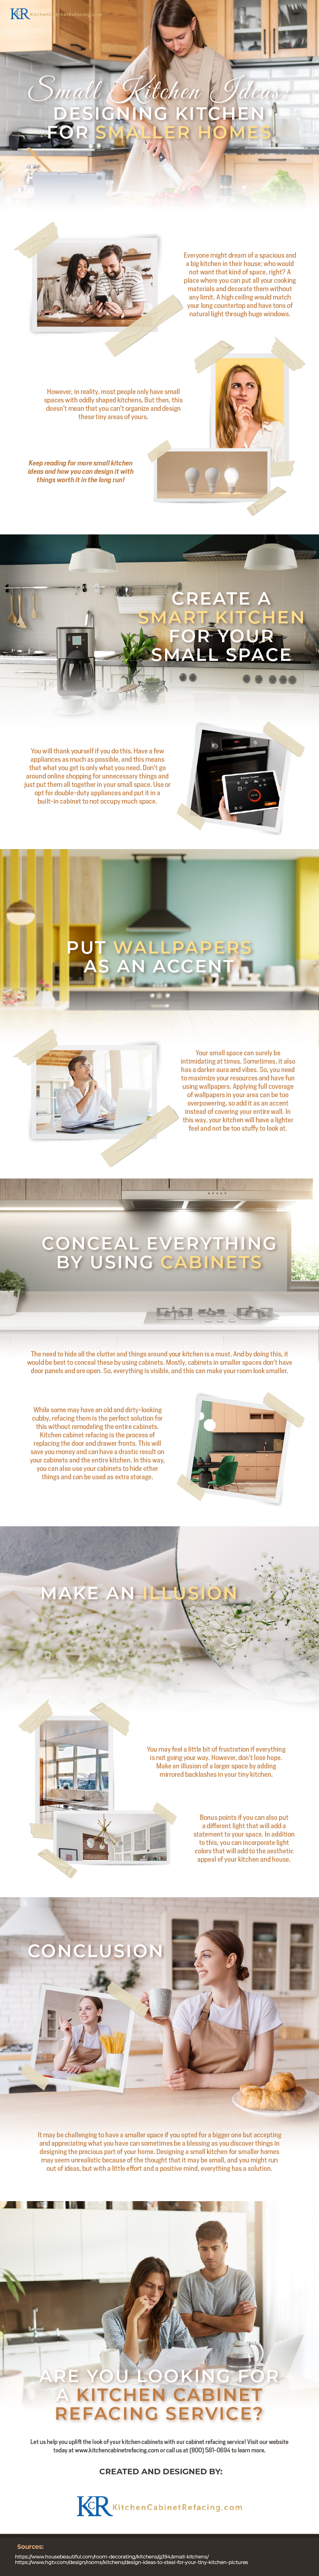 Small_Kitchen_Ideas_Designing_Kitchen_for_Smaller_Homes_infographic_image